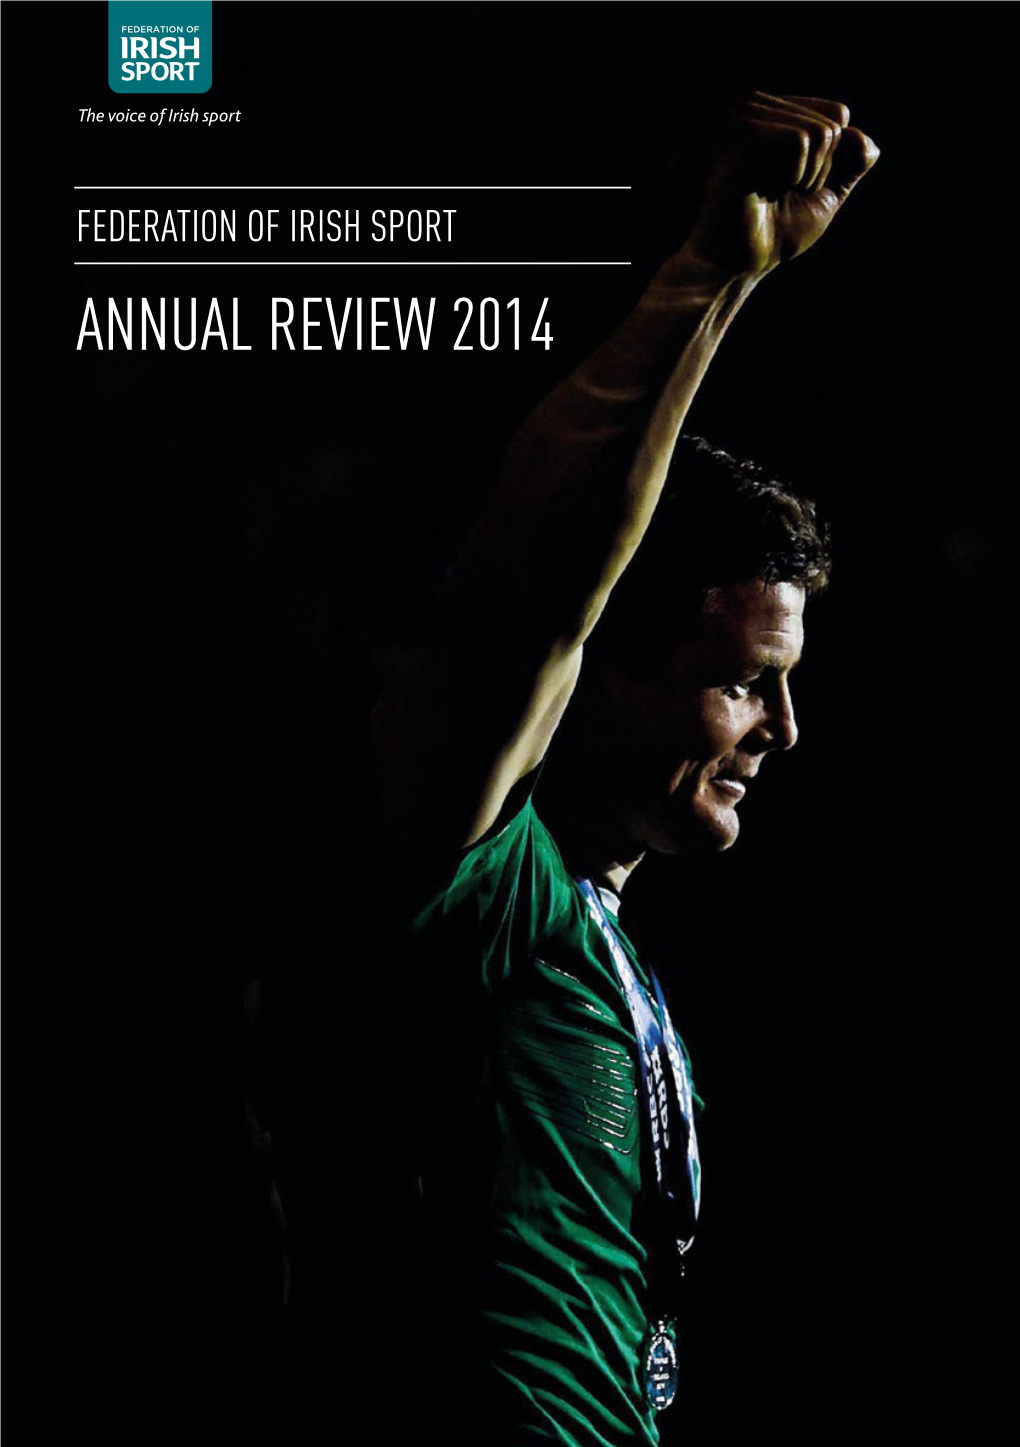 ANNUAL REVIEW 2014 WHY IRISH SPORT MATTERS It’S More Than Just Sport… BOARD and STAFF PROFILES